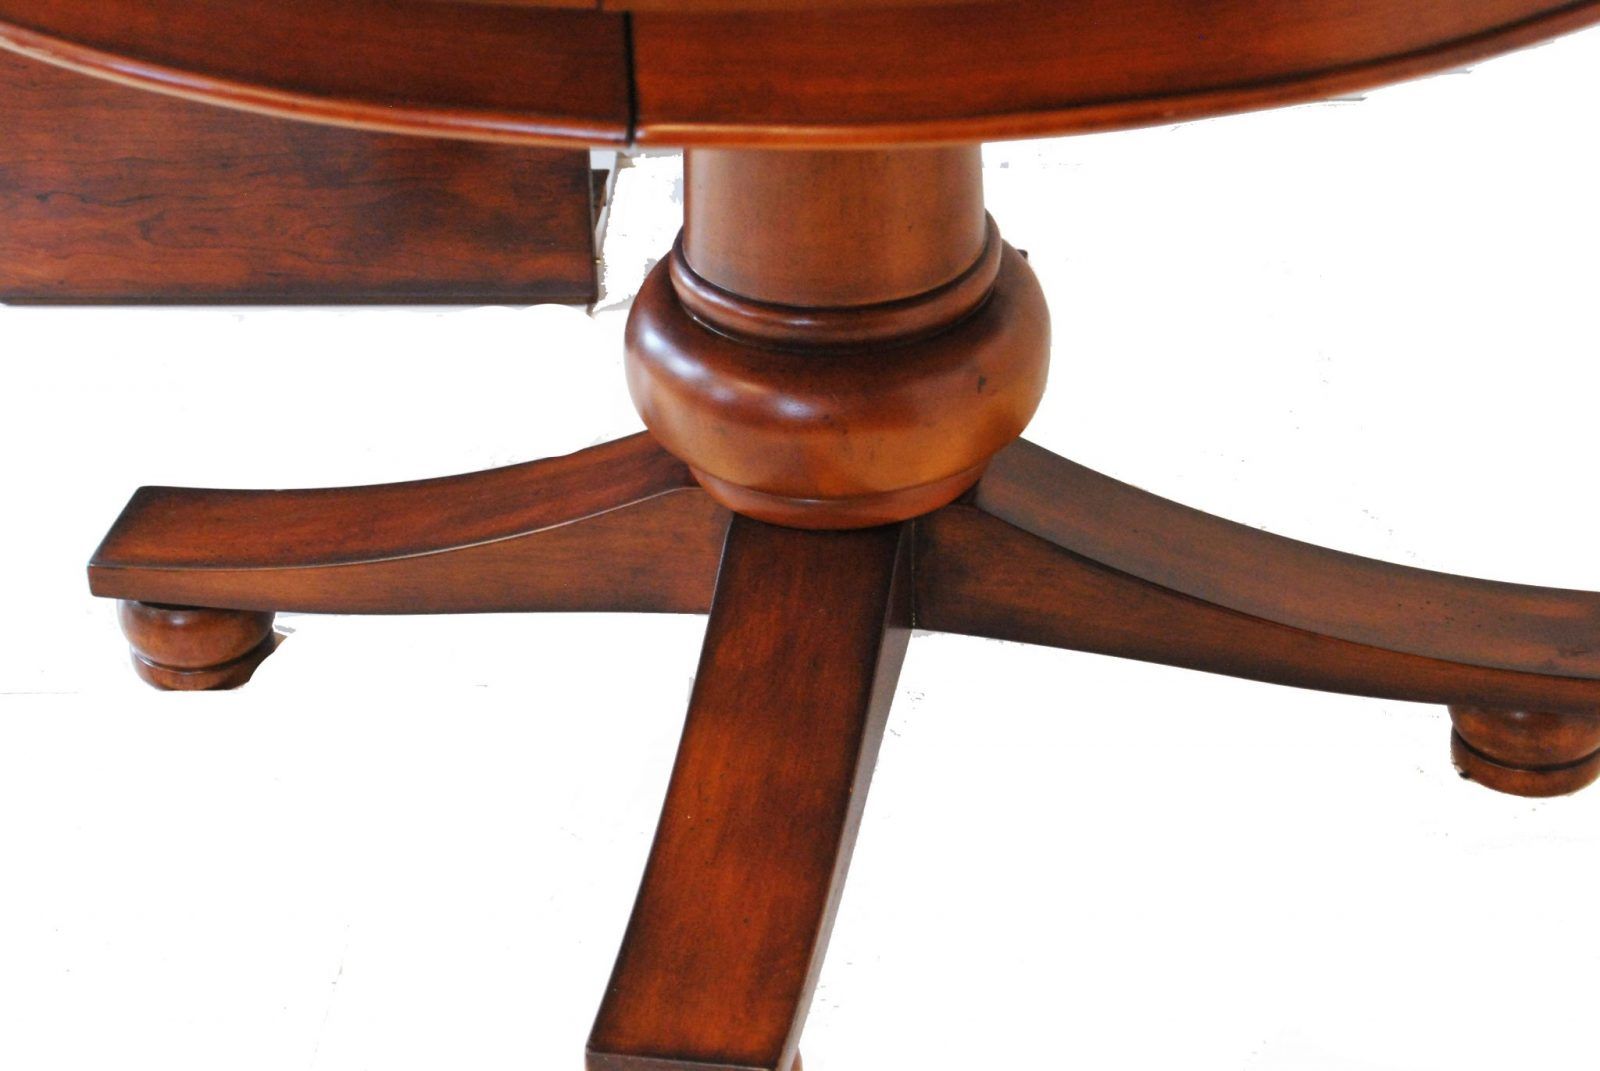 Round Dining Table With Leaf Extension | Mary Kay's Furniture With Regard To Leaf Round Console Tables (View 9 of 20)